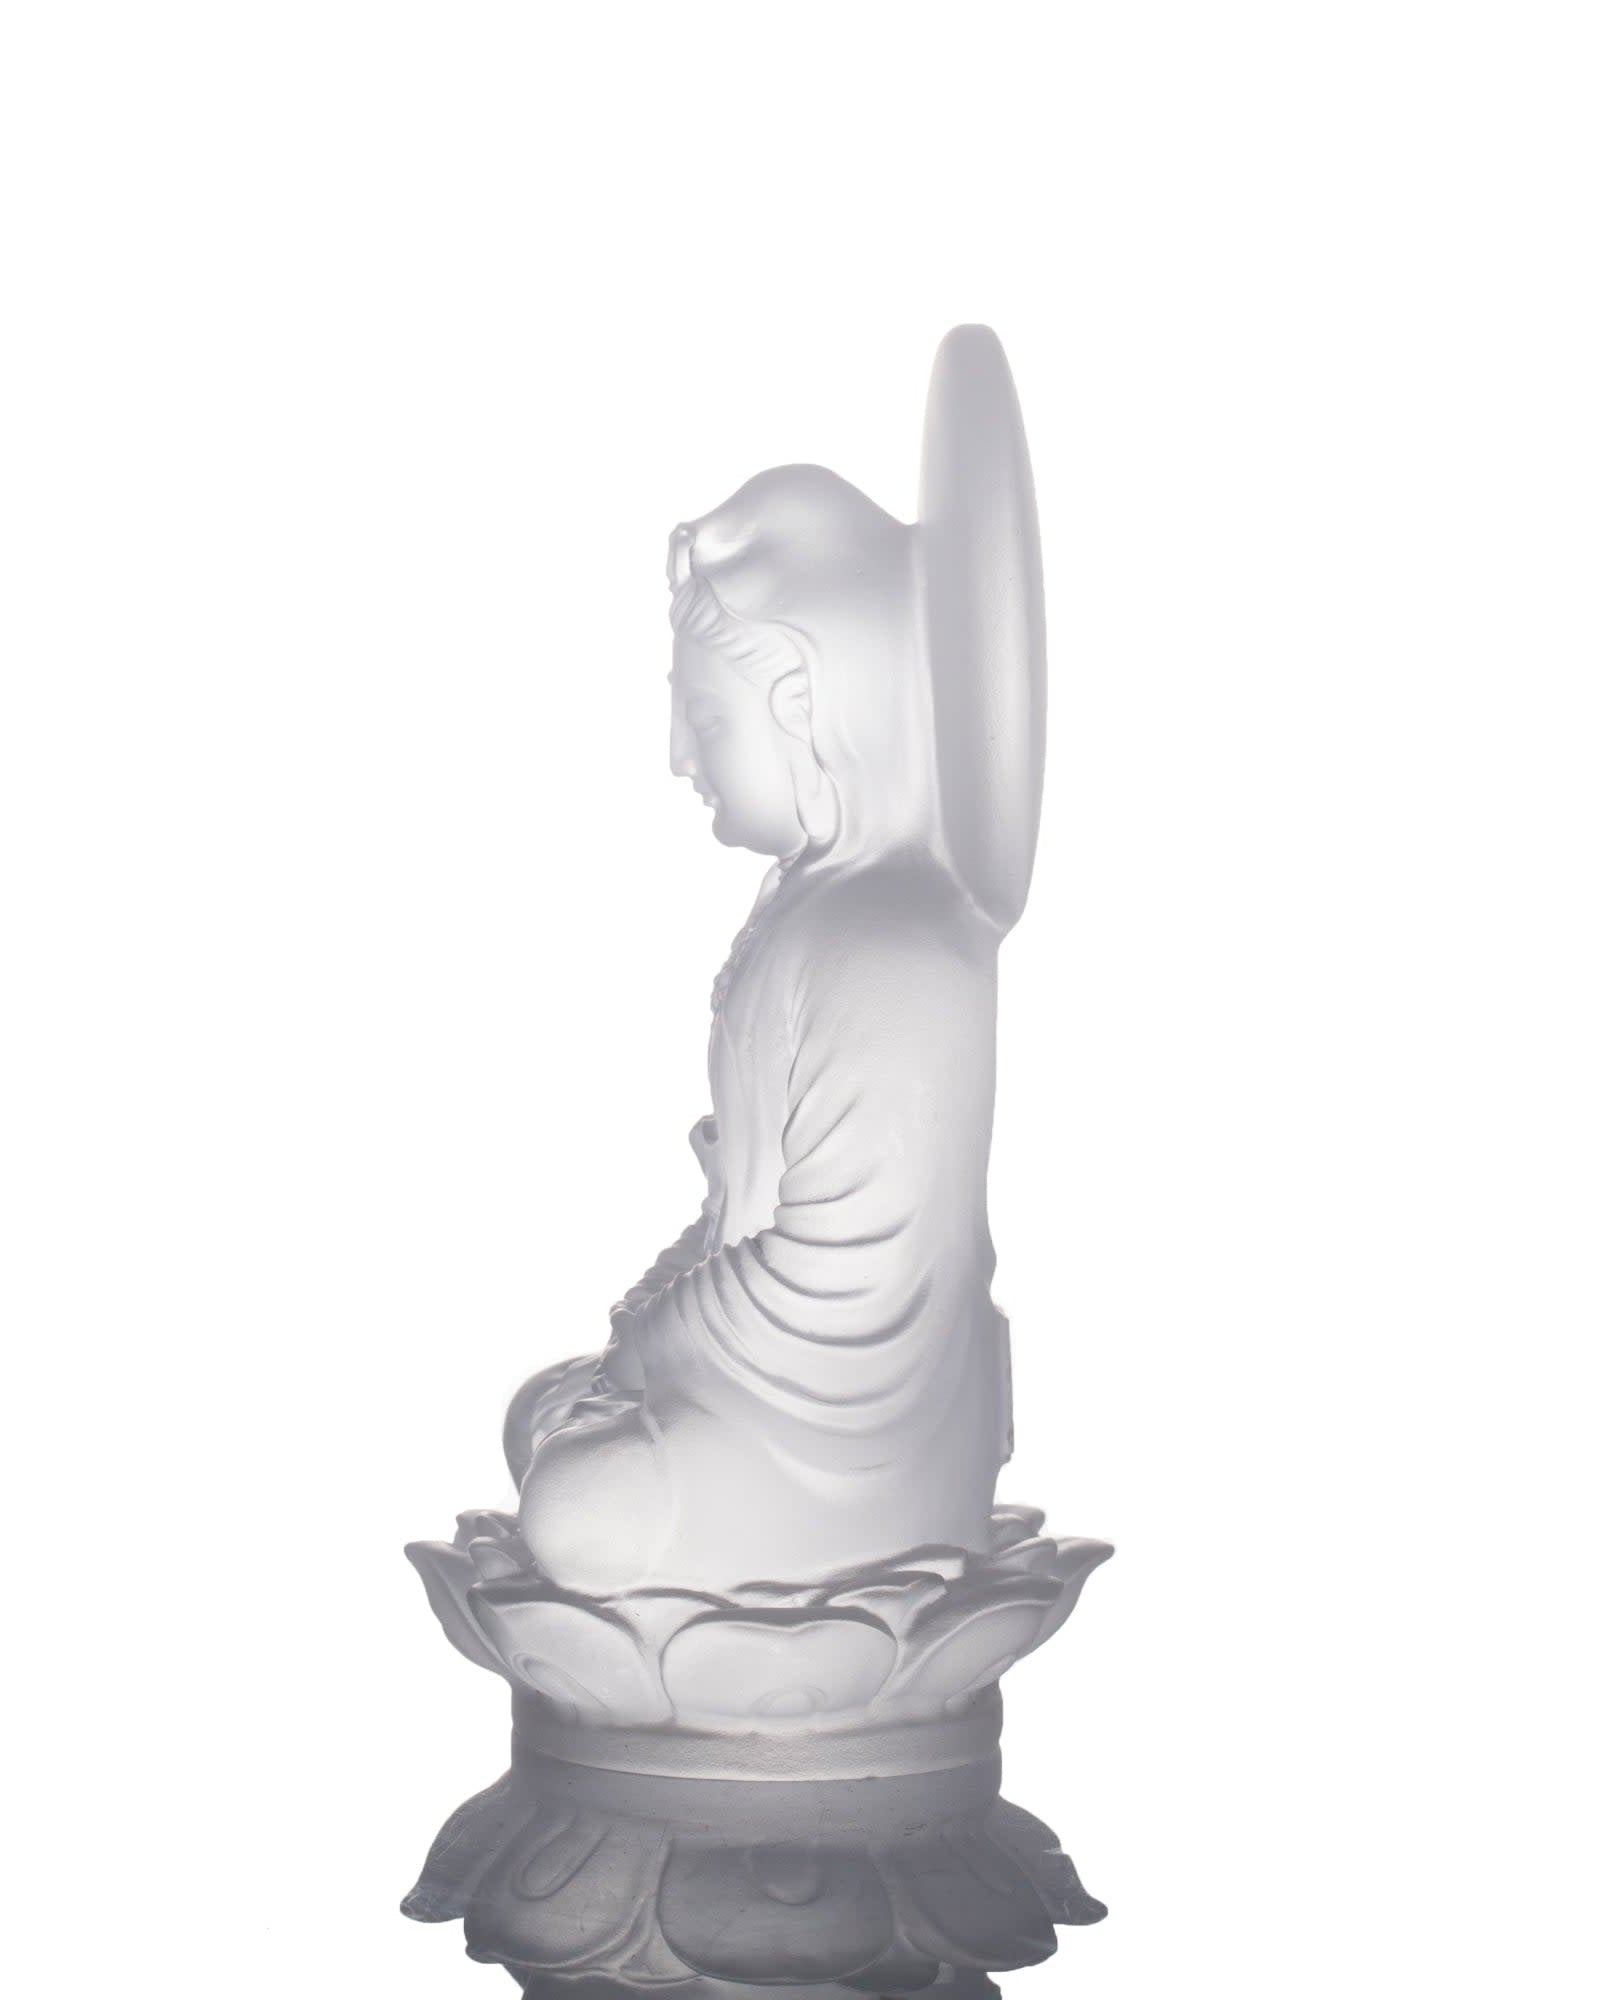 LIULI Crystal Art Crystal Guanyin Sculpture, "Accompanied By Ease"